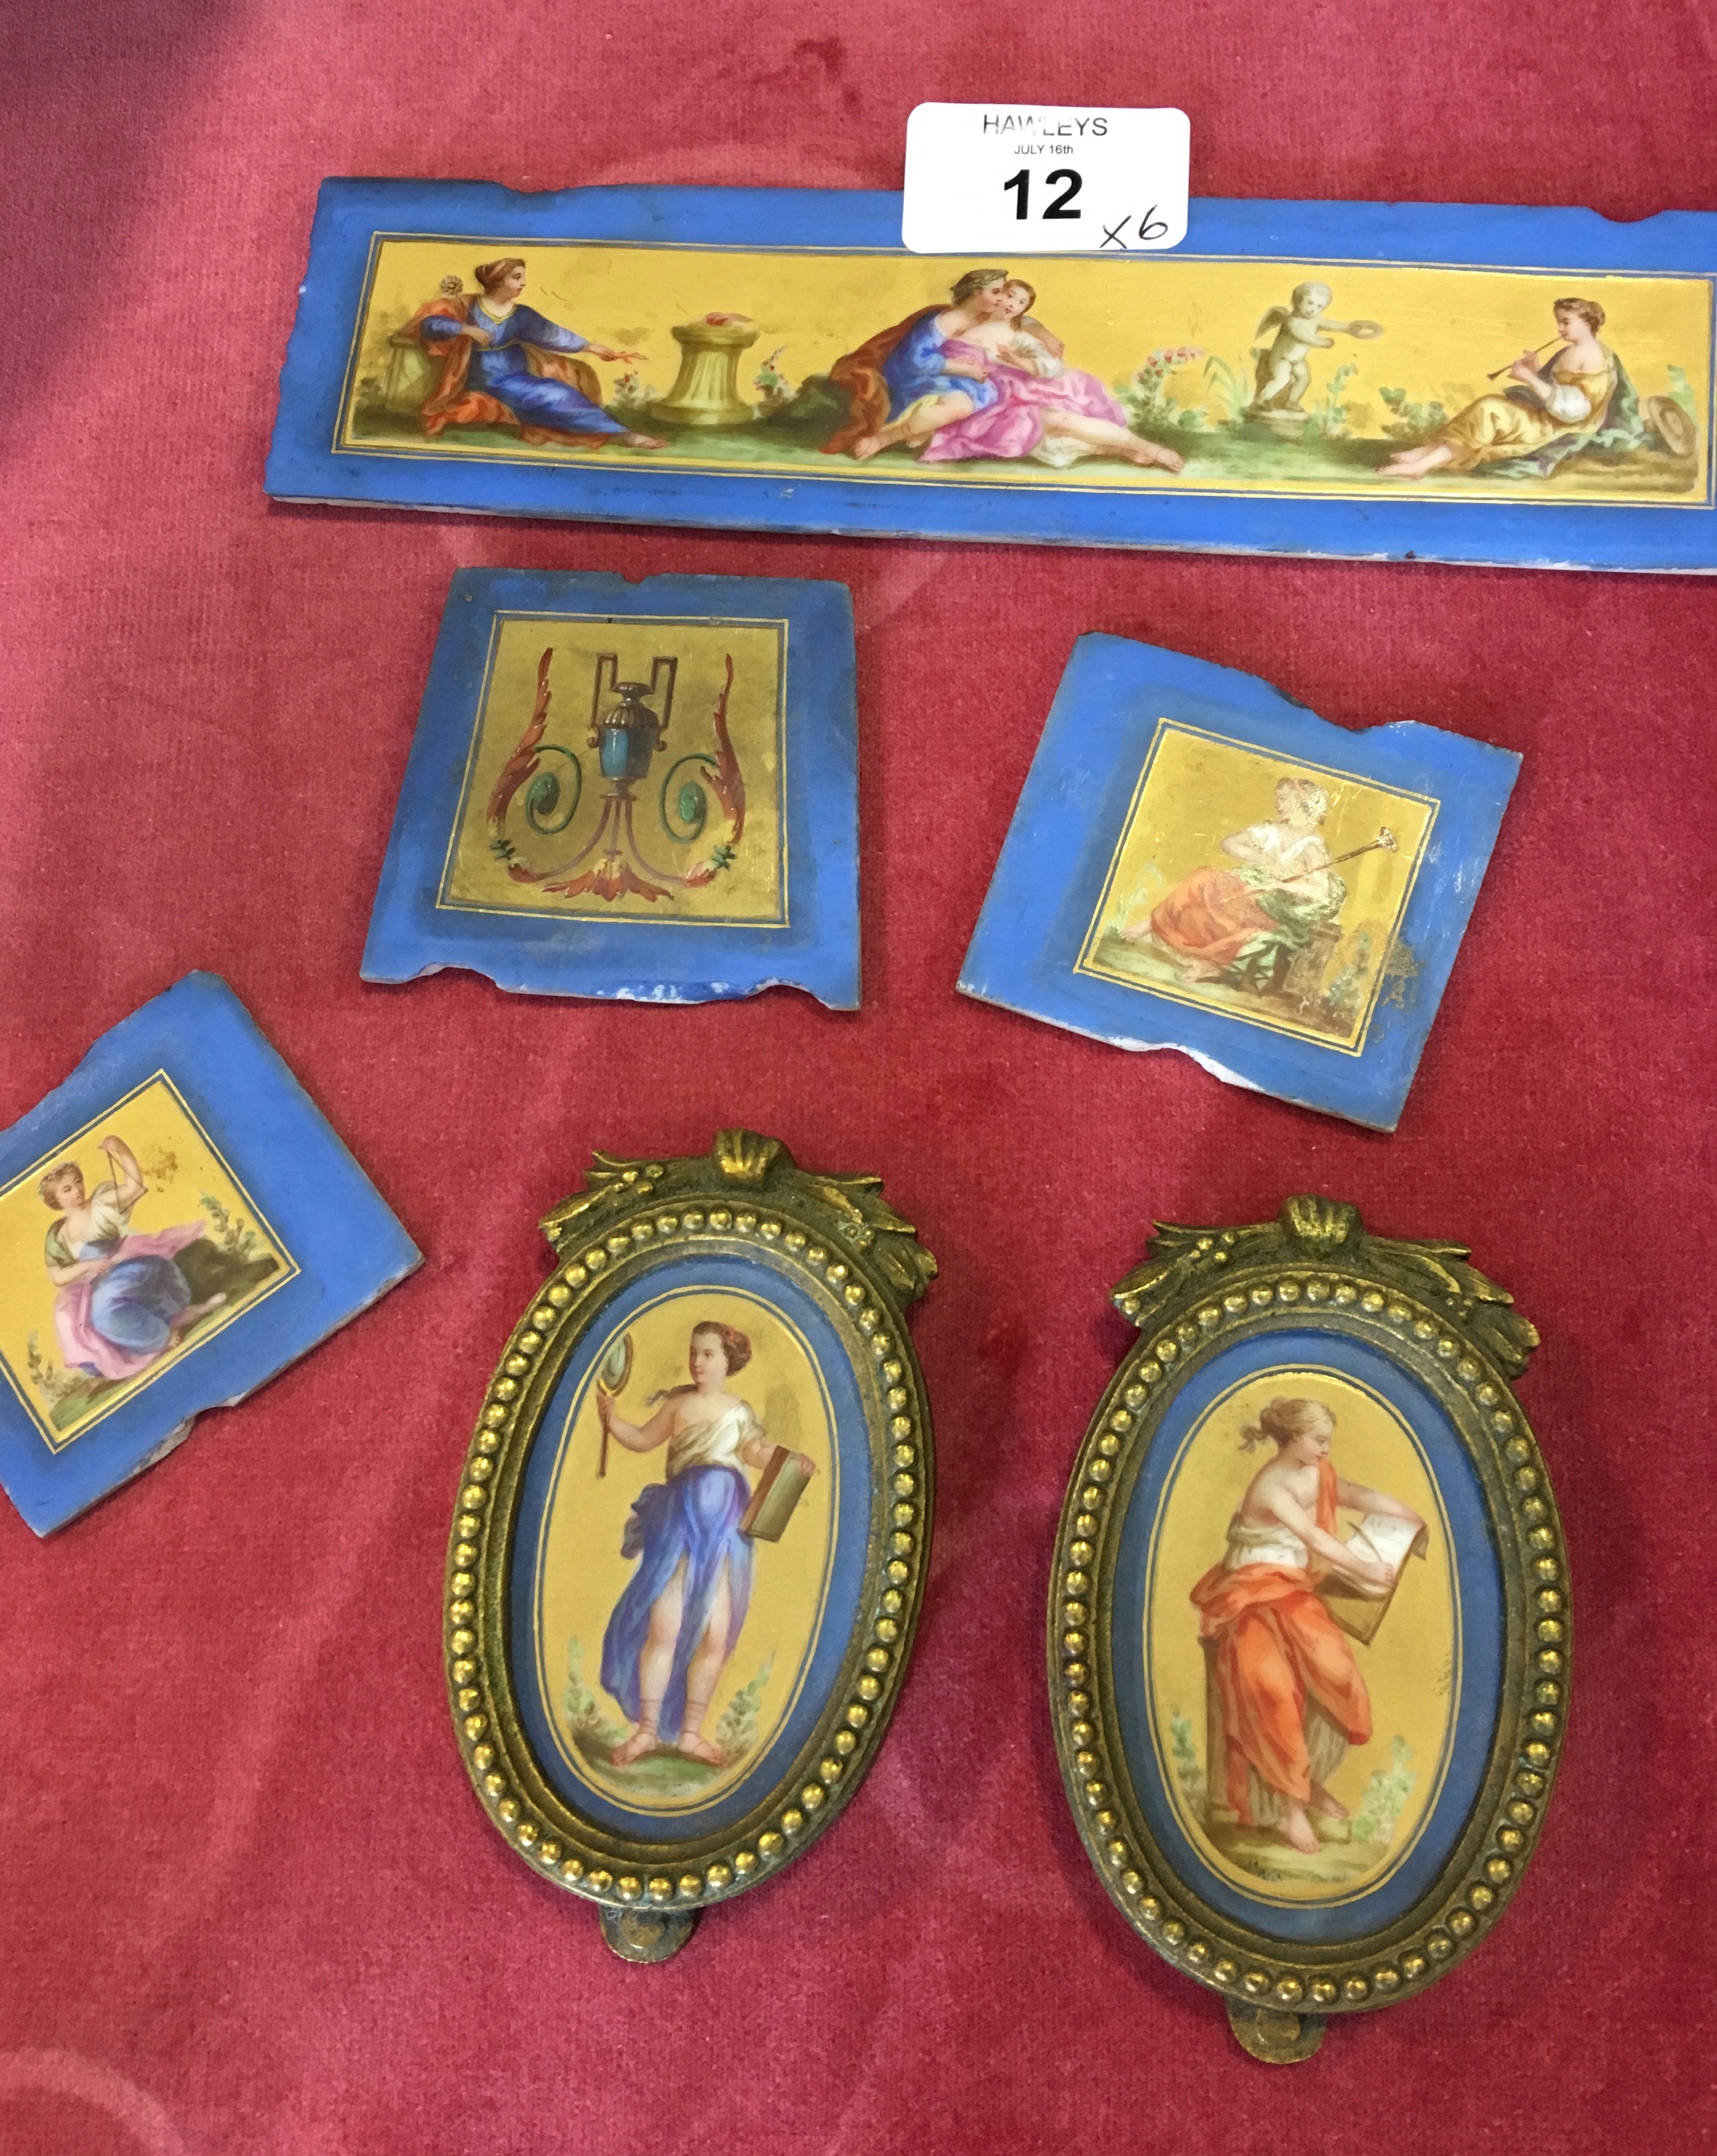 Six small hand painted porcelain plaques